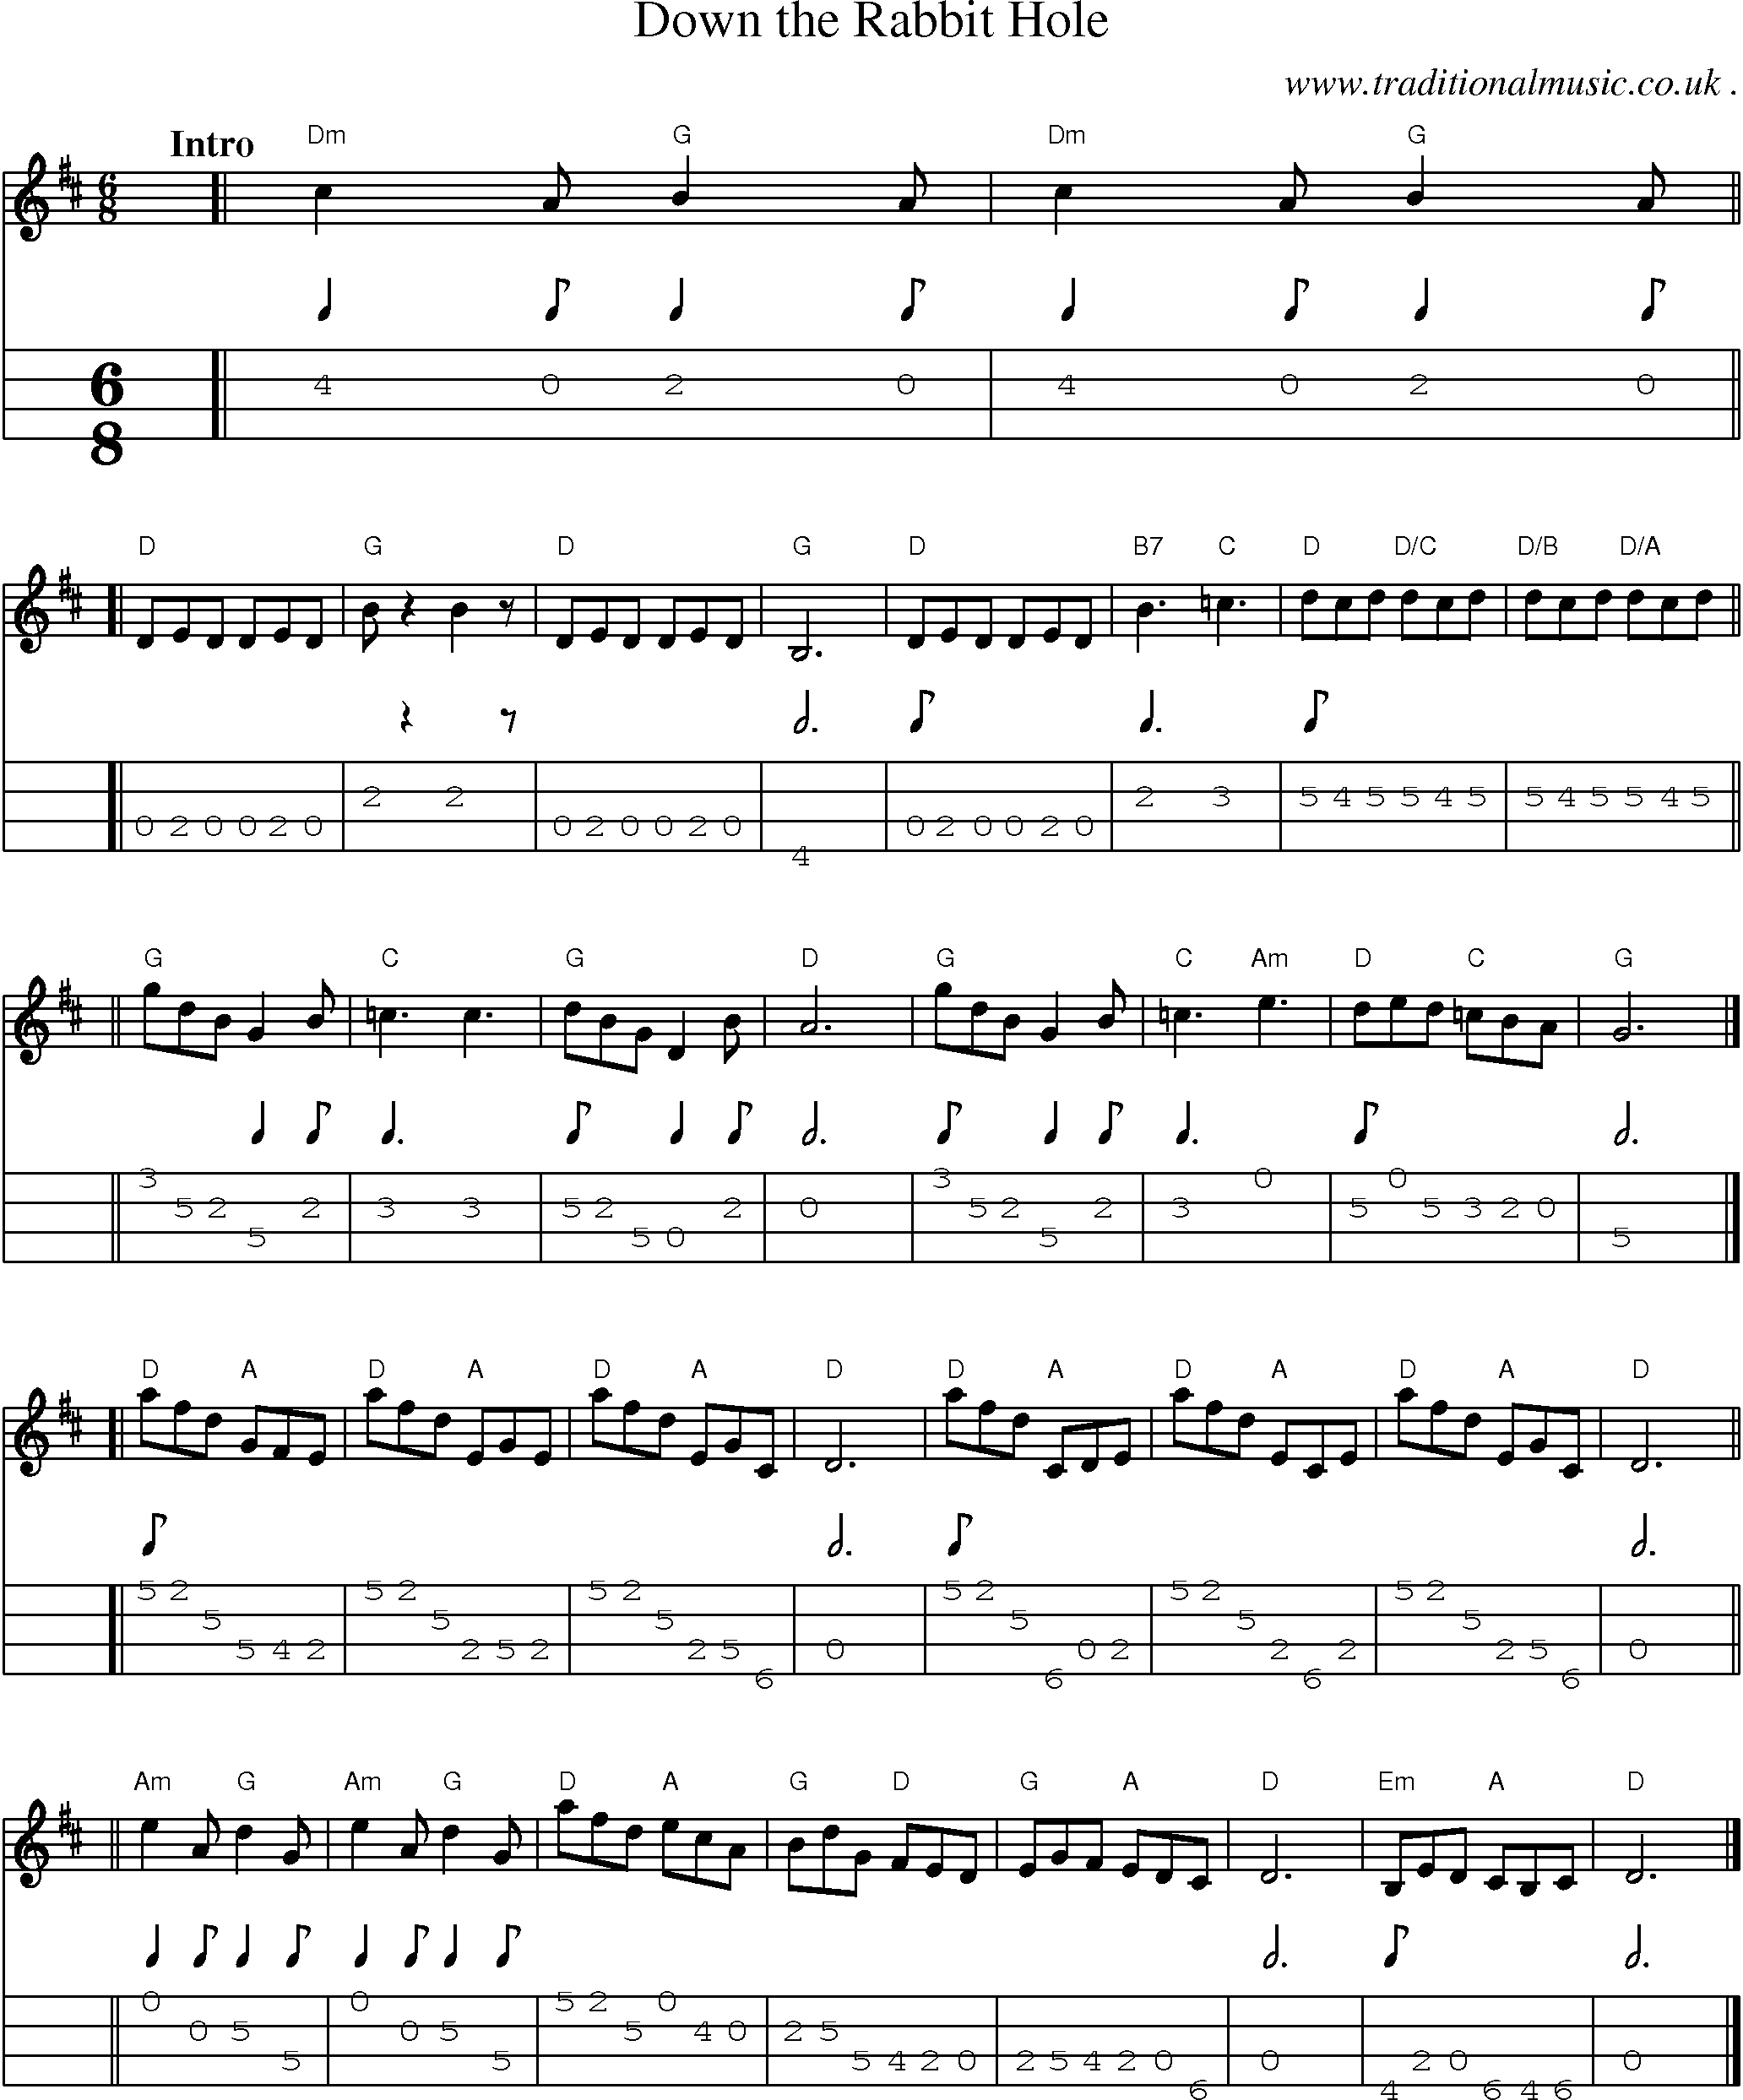 Sheet-music  score, Chords and Mandolin Tabs for Down The Rabbit Hole